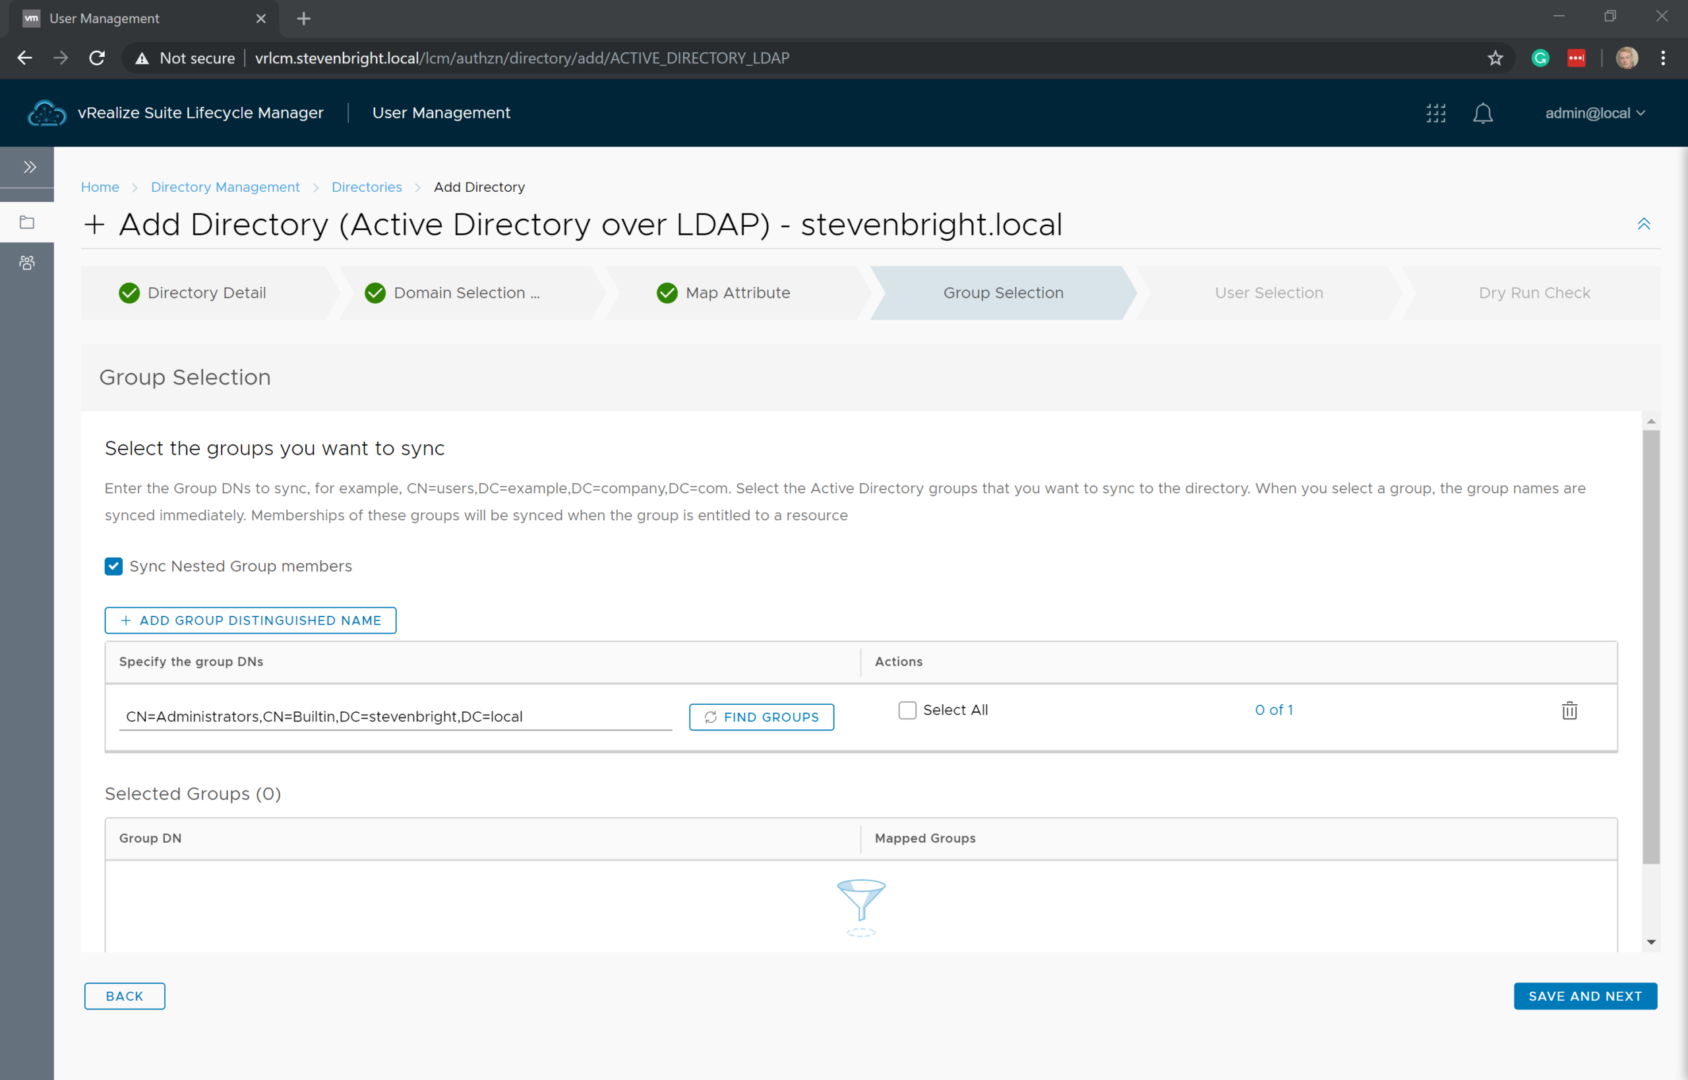 vRealize Suite Lifecycle Manager - User Management - Directory Management - Add Directory Wizard - Group Selection